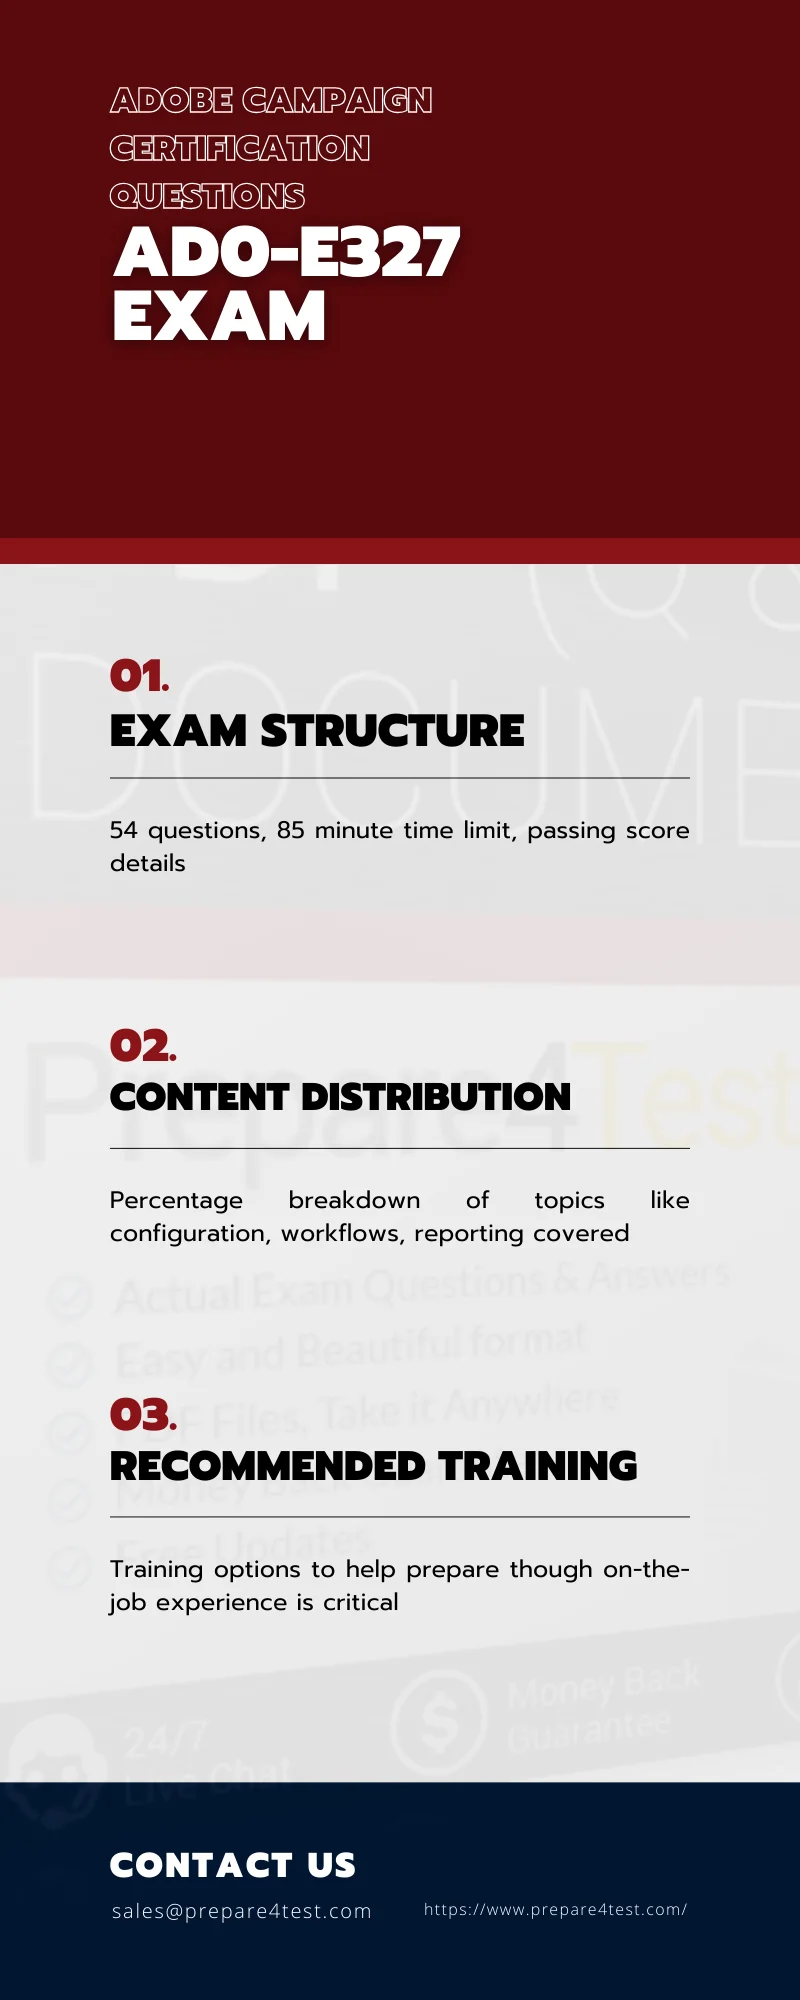 Adobe Campaign Certification Questions Infographic